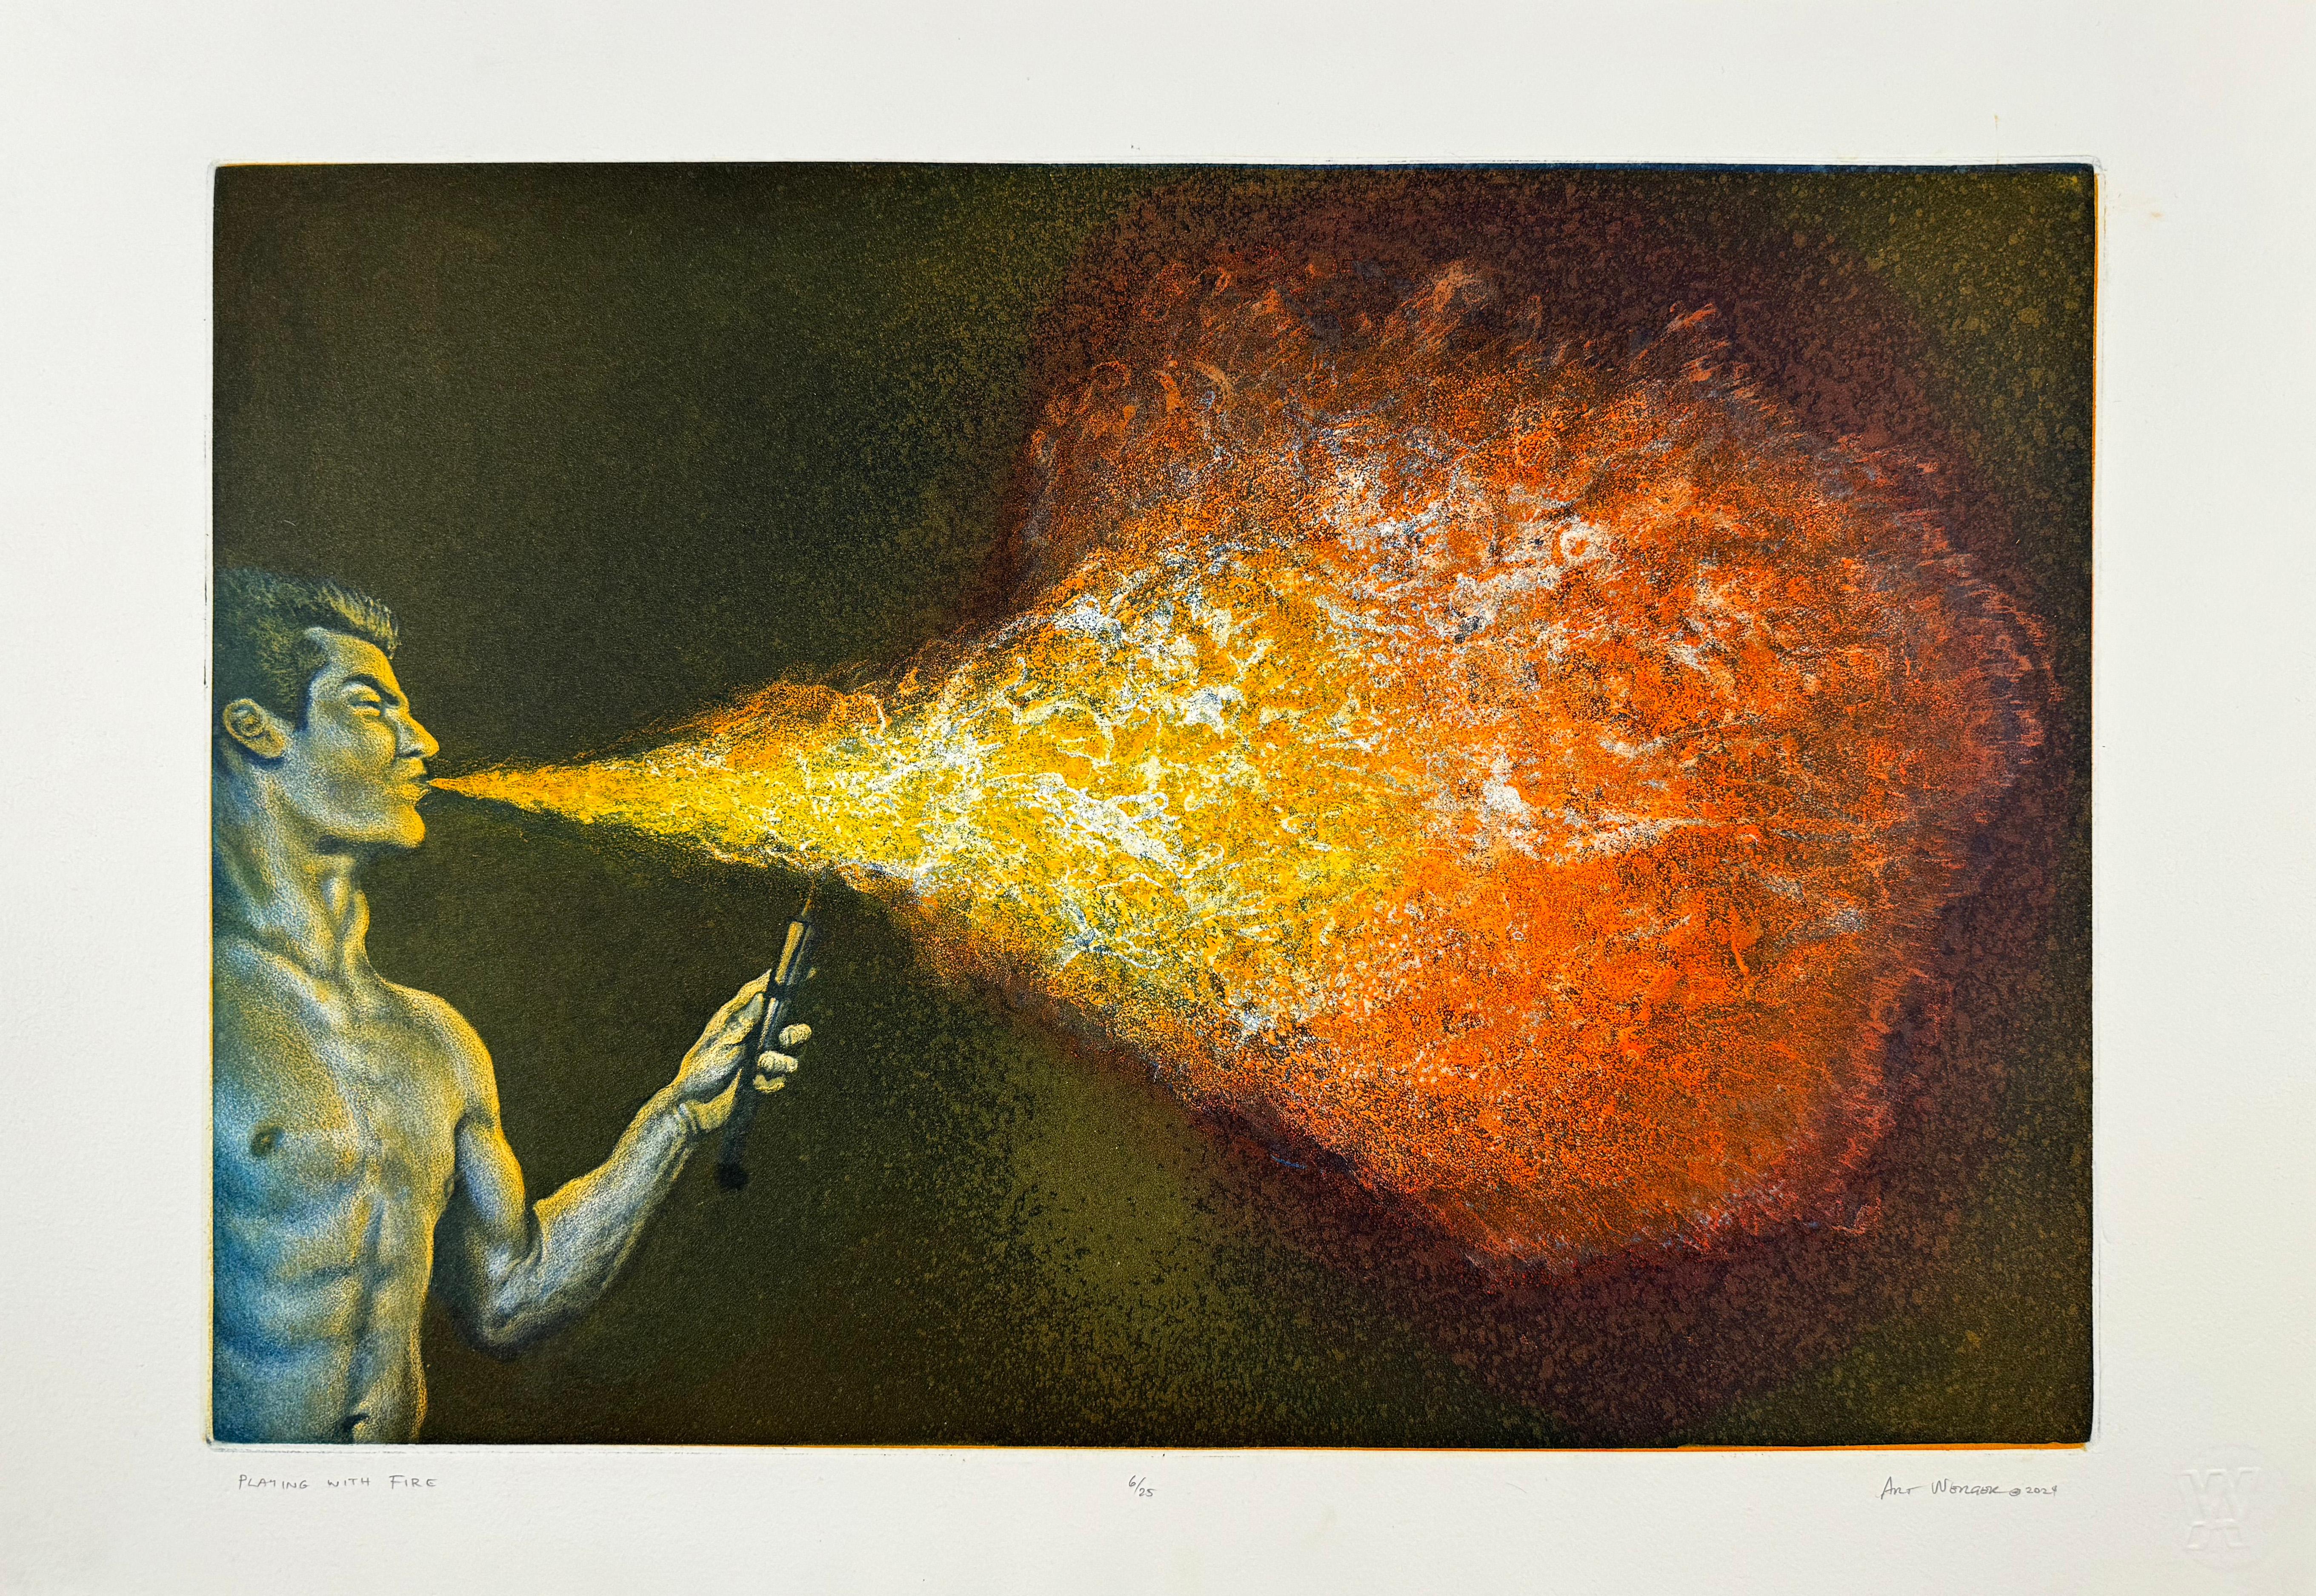 Playing With Fire - Print by Art Werger